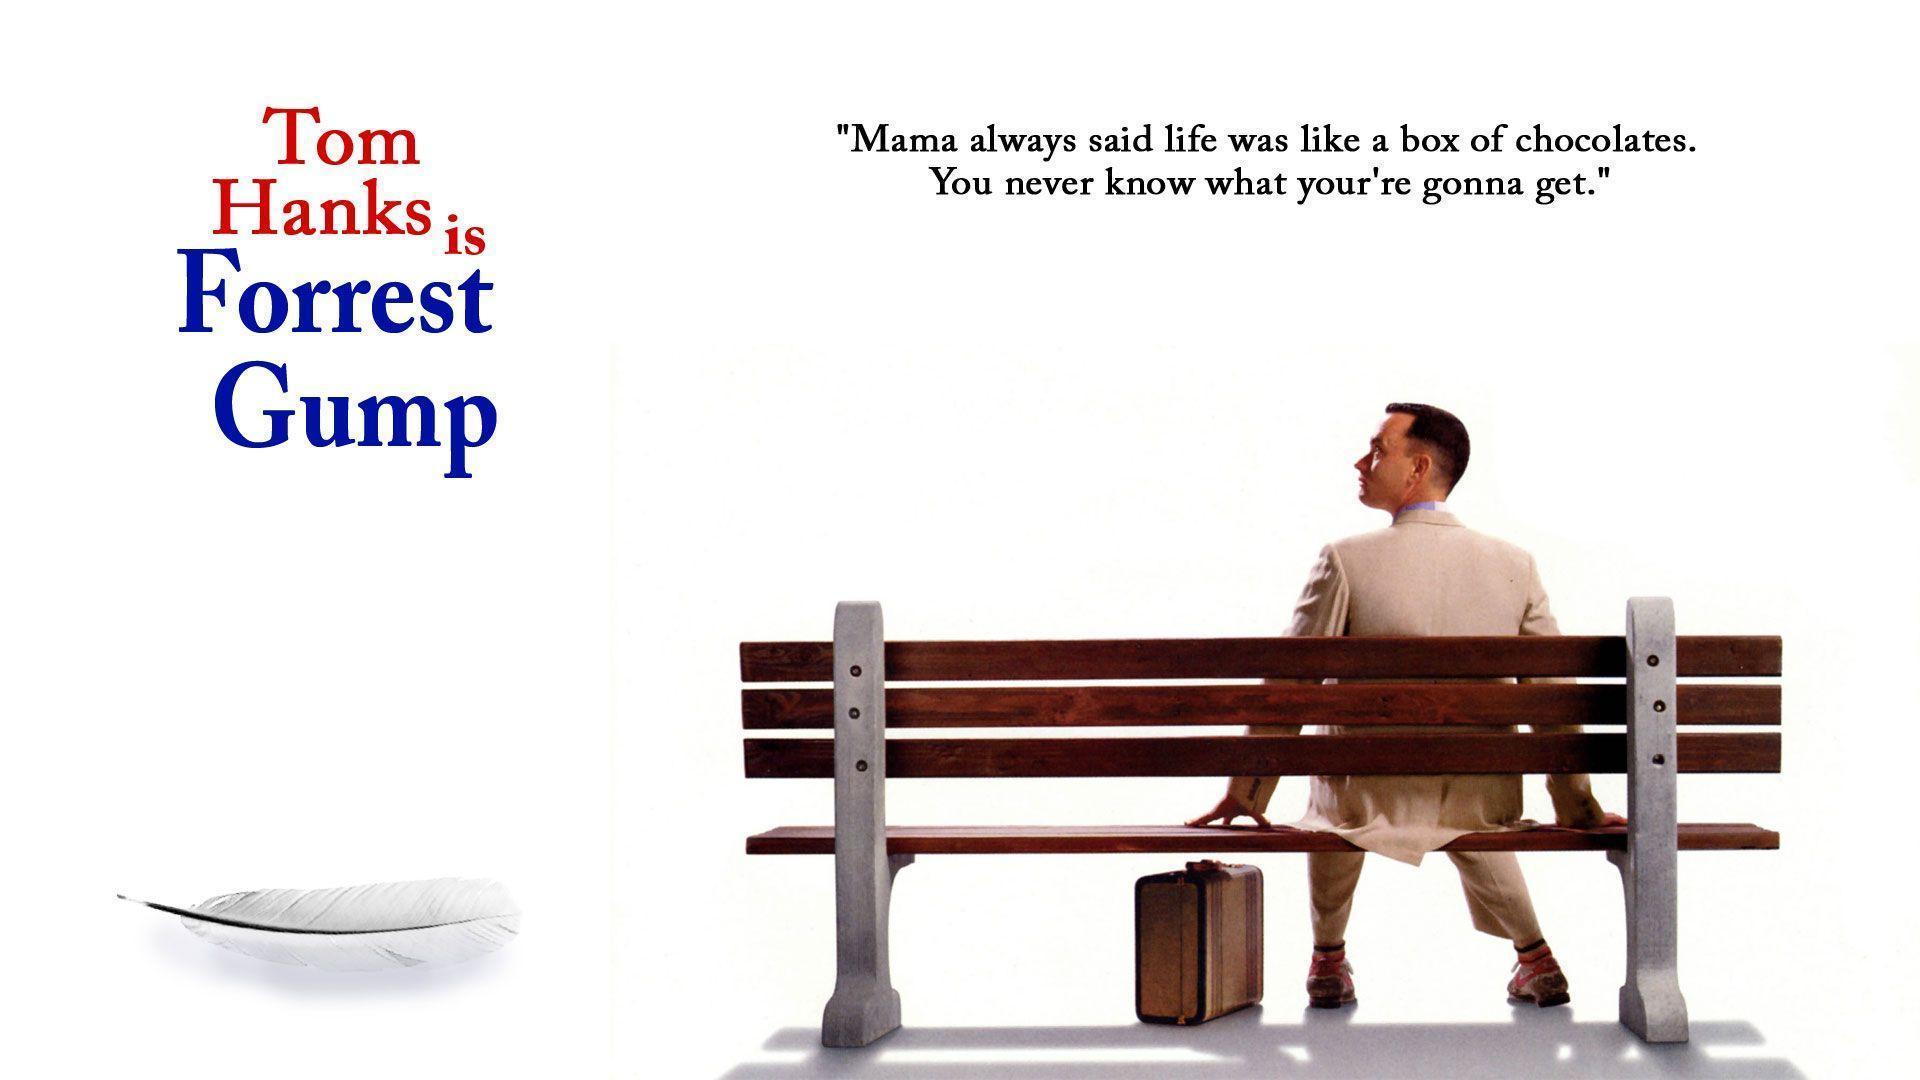 Forrest Gump « Latest Movie Wallpaper in High Quality Resolutions